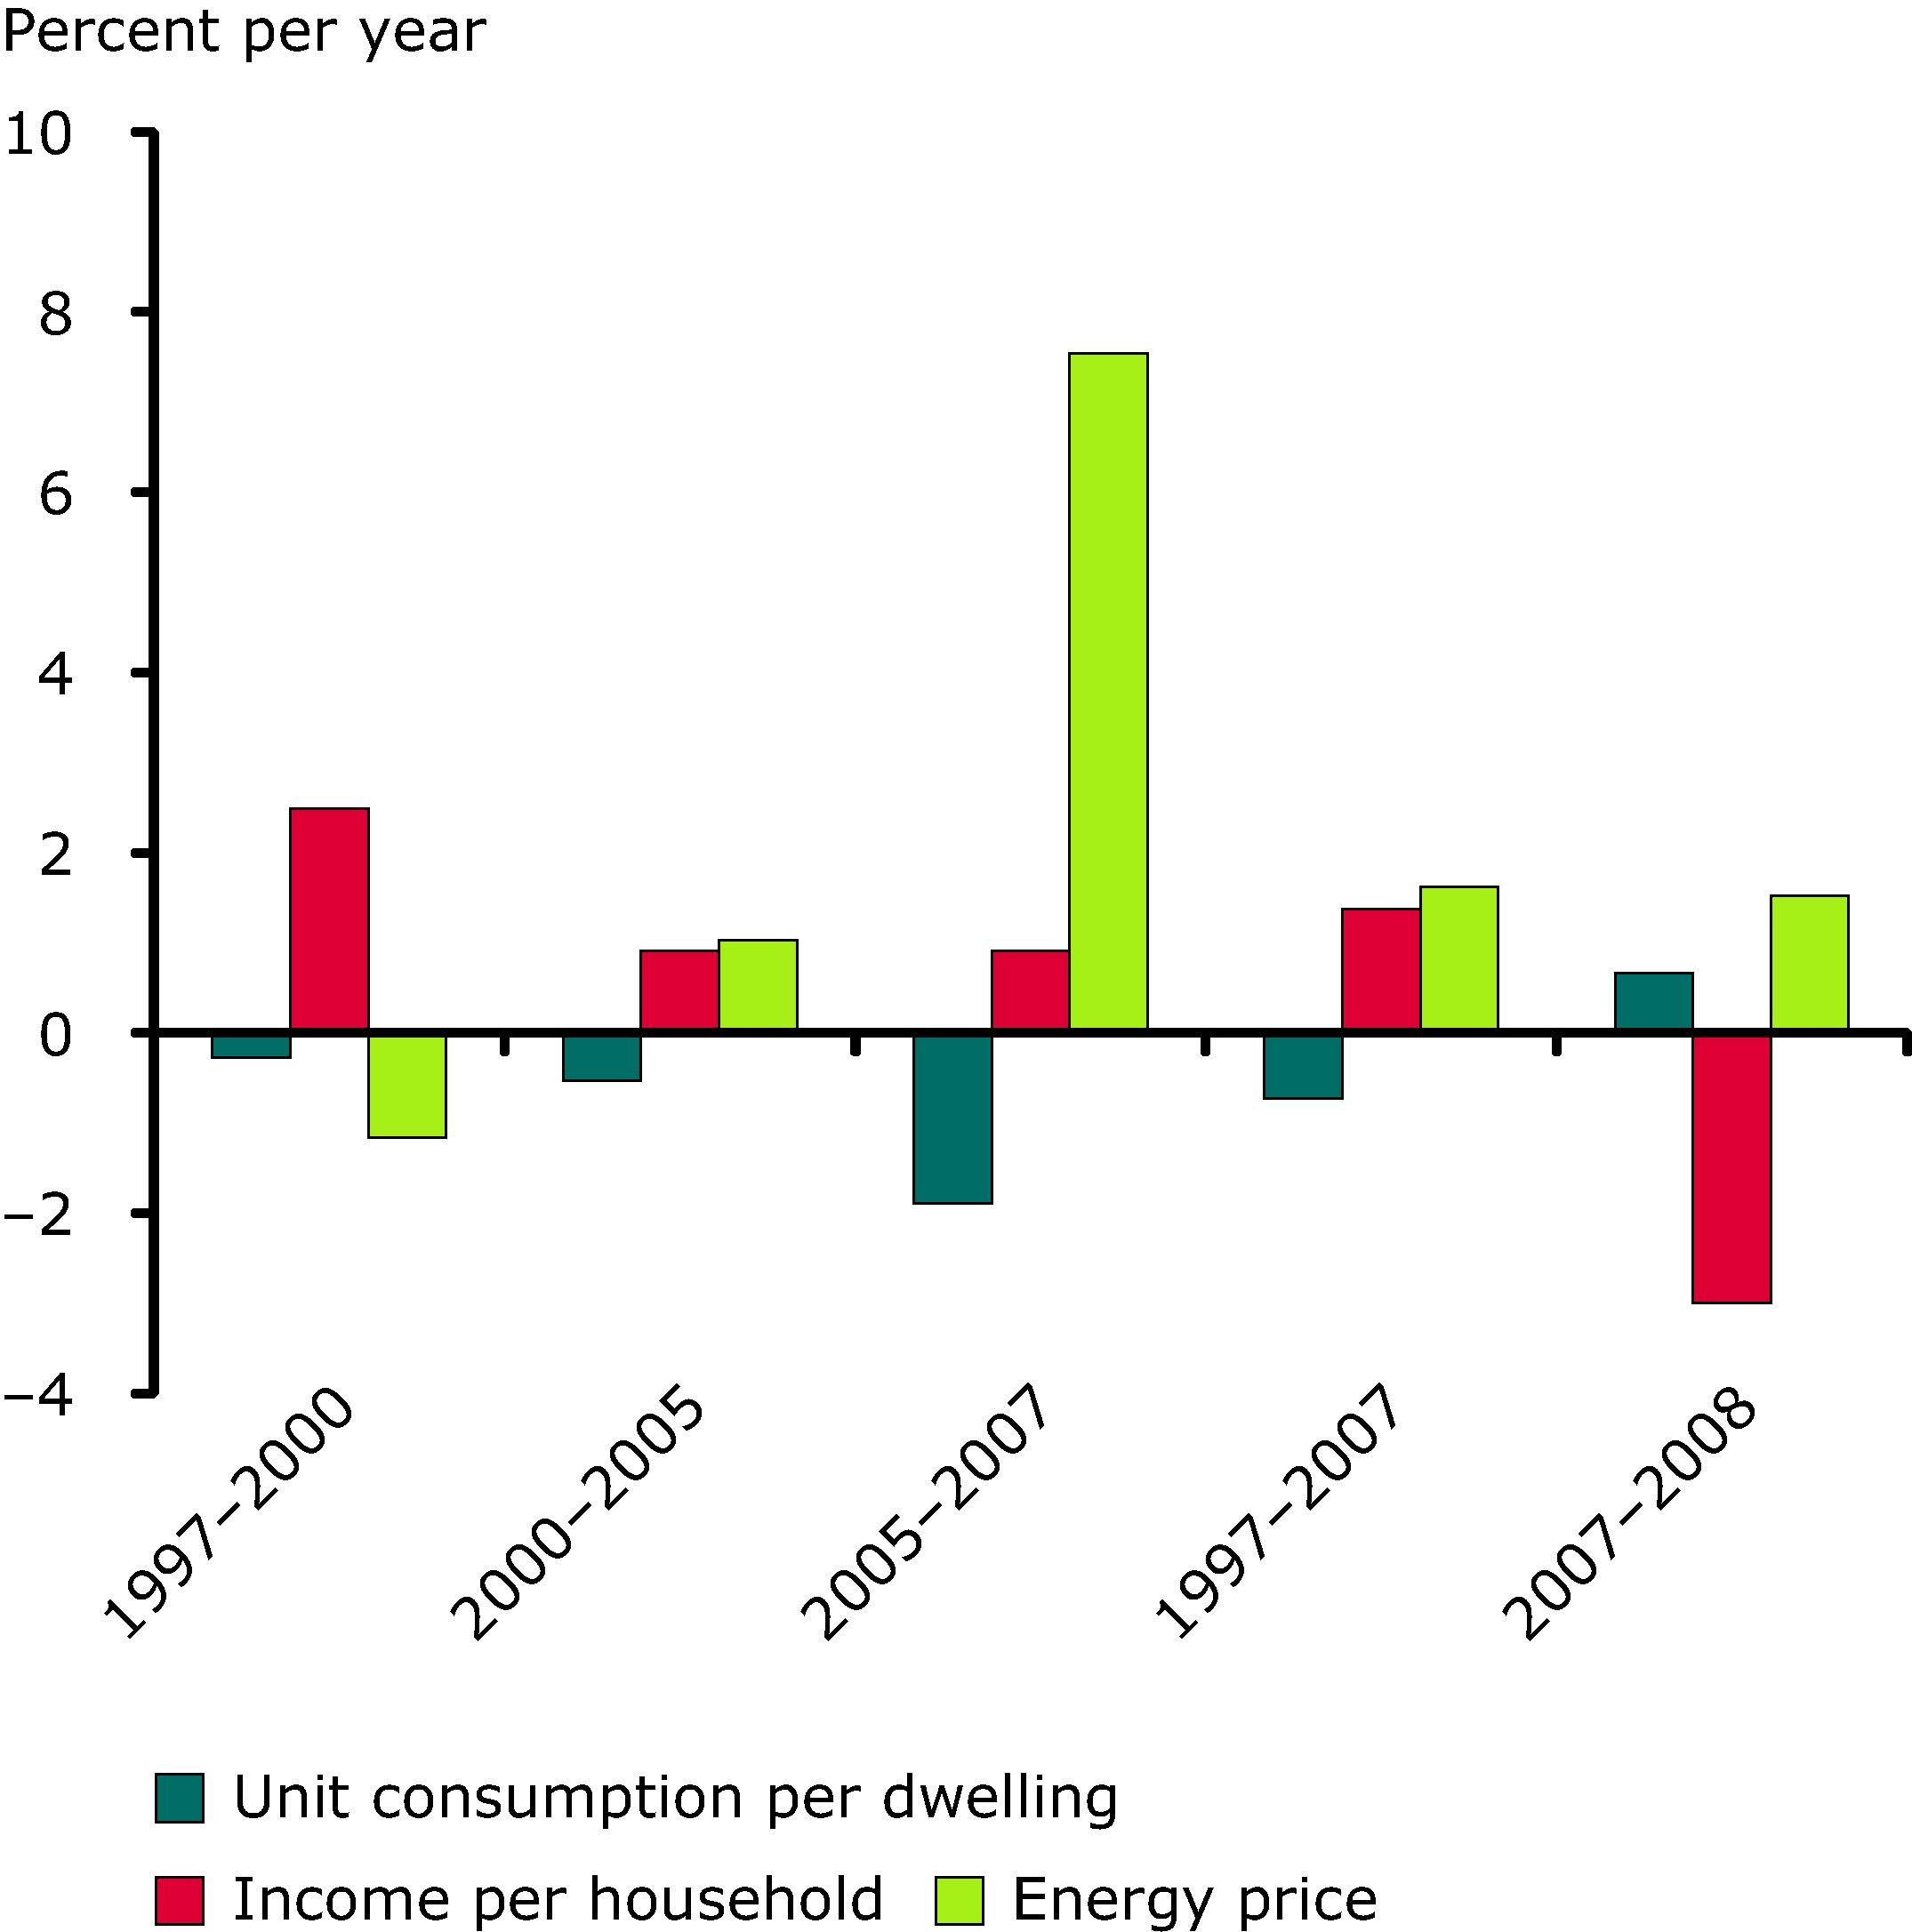 Influence of income and energy prices on household consumption per dwelling